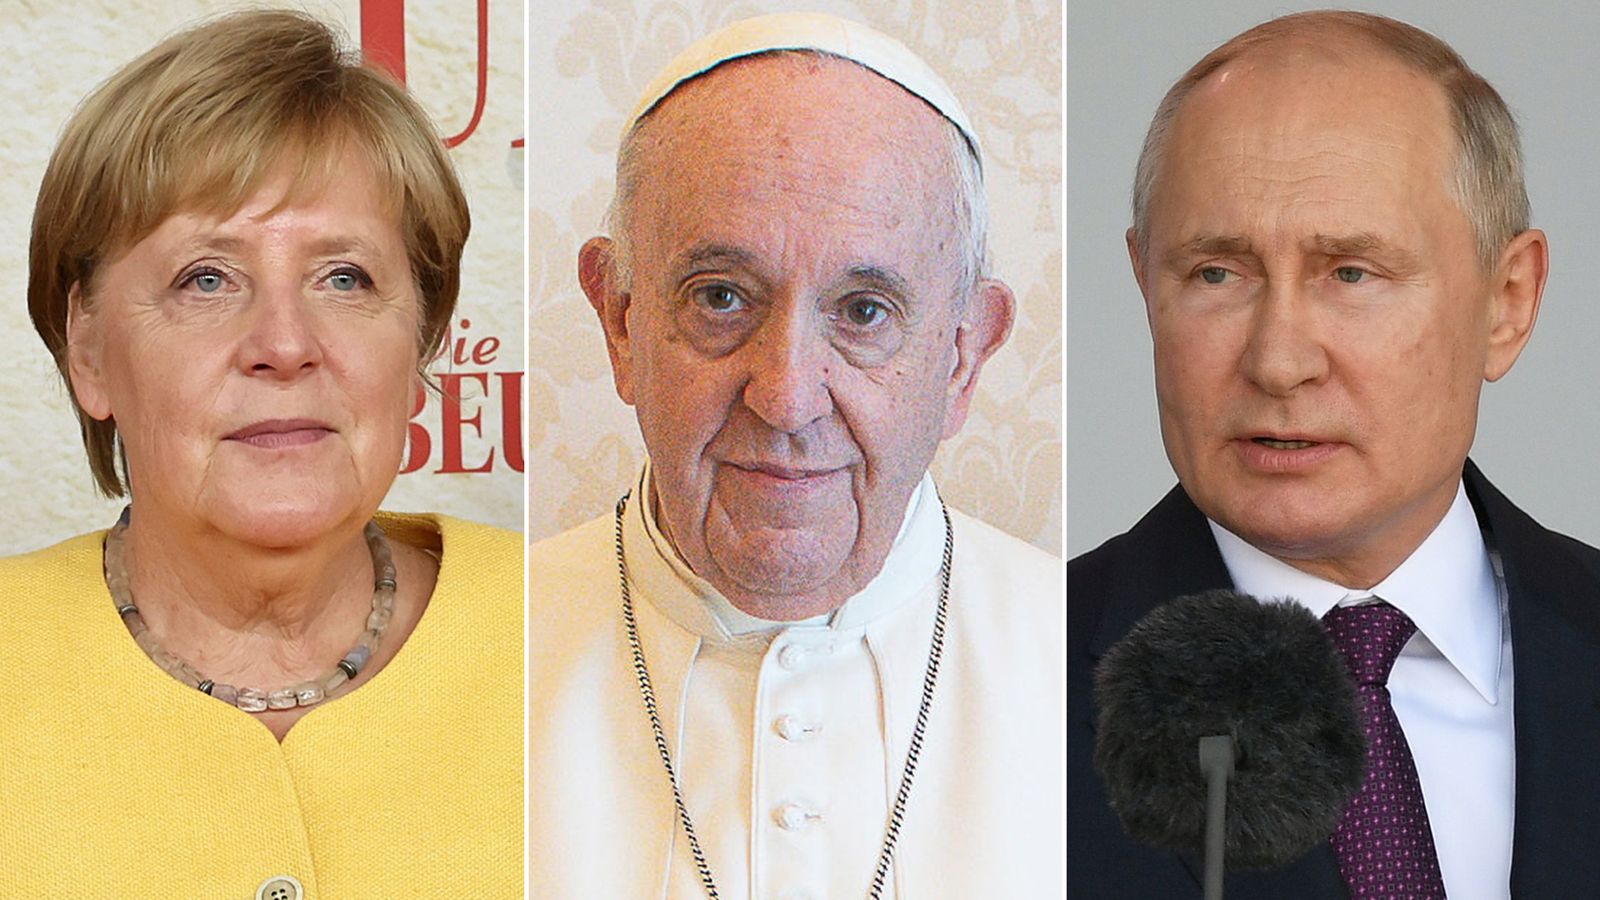 Pope Francis criticises West’s involvement in Afghanistan – but quotes Putin instead of Merkel